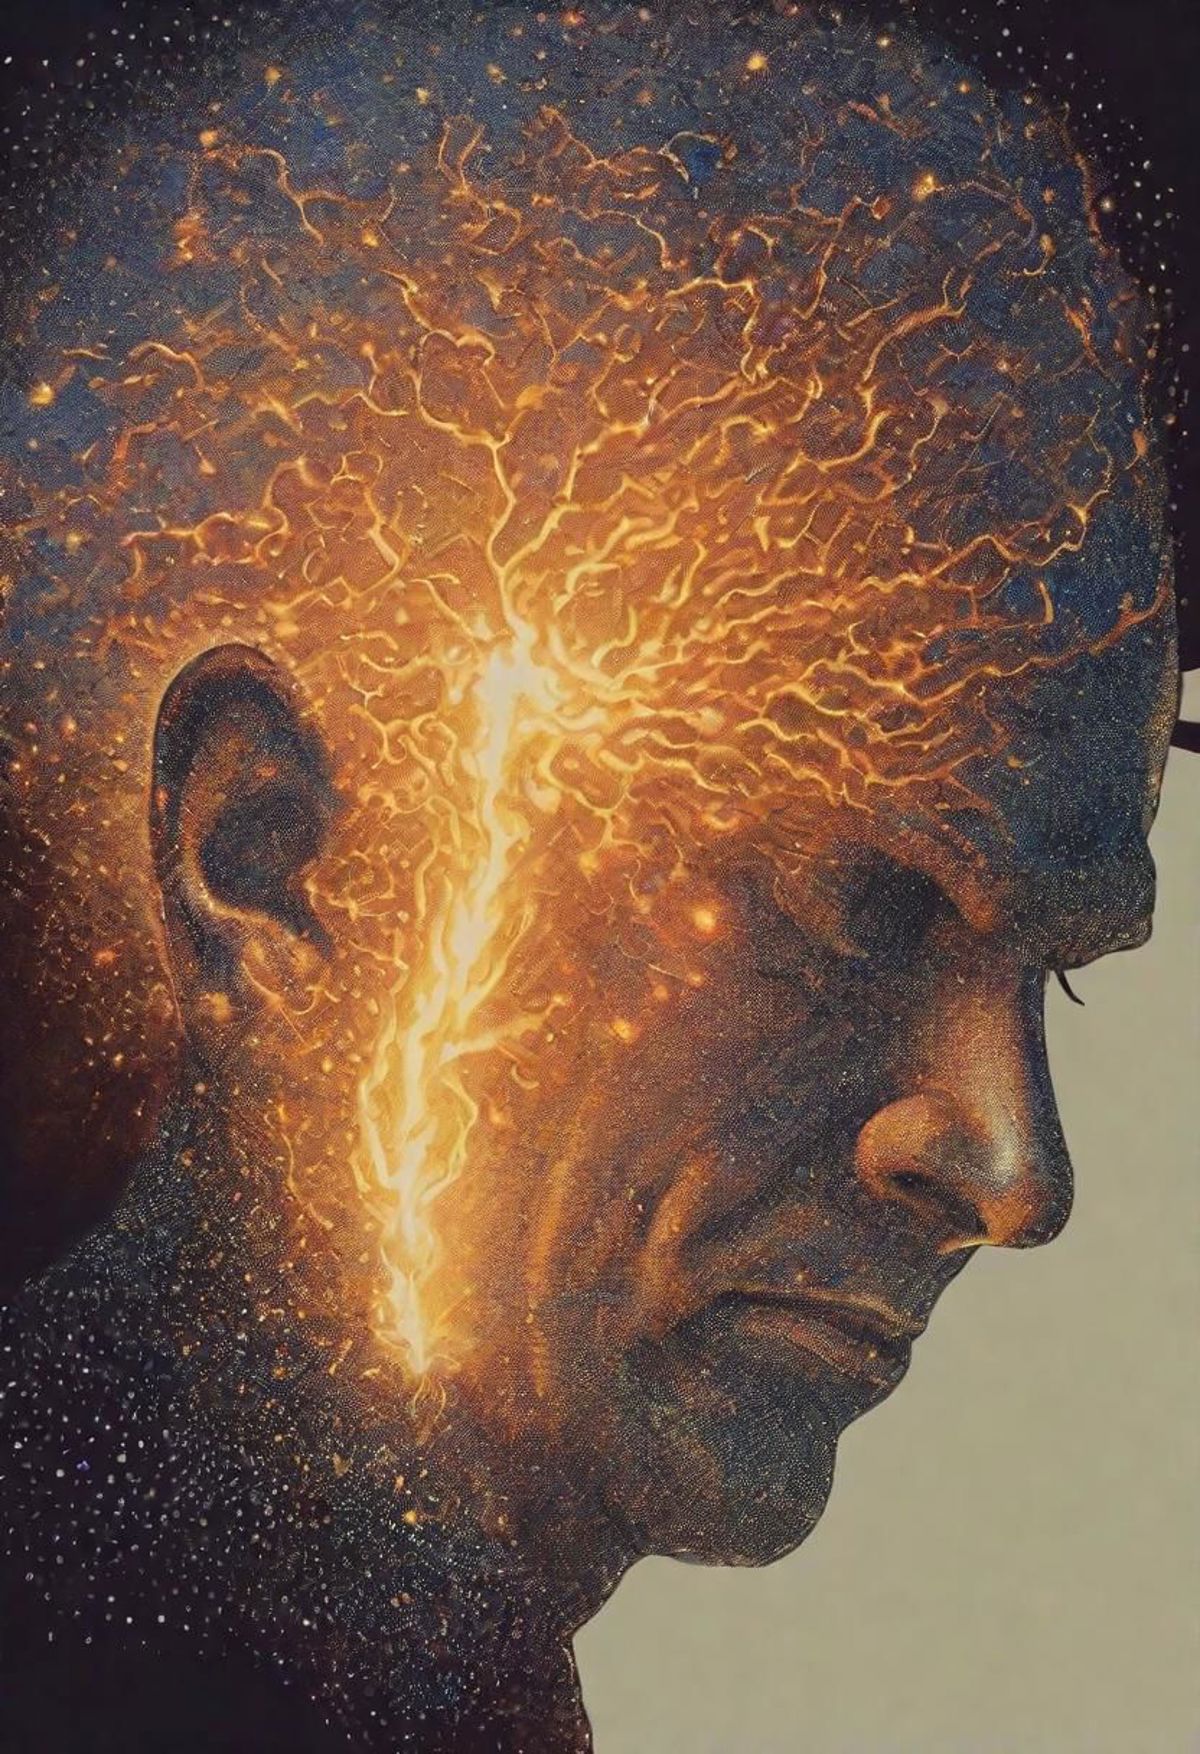 Man's Head with Flames and Lightning Bolts